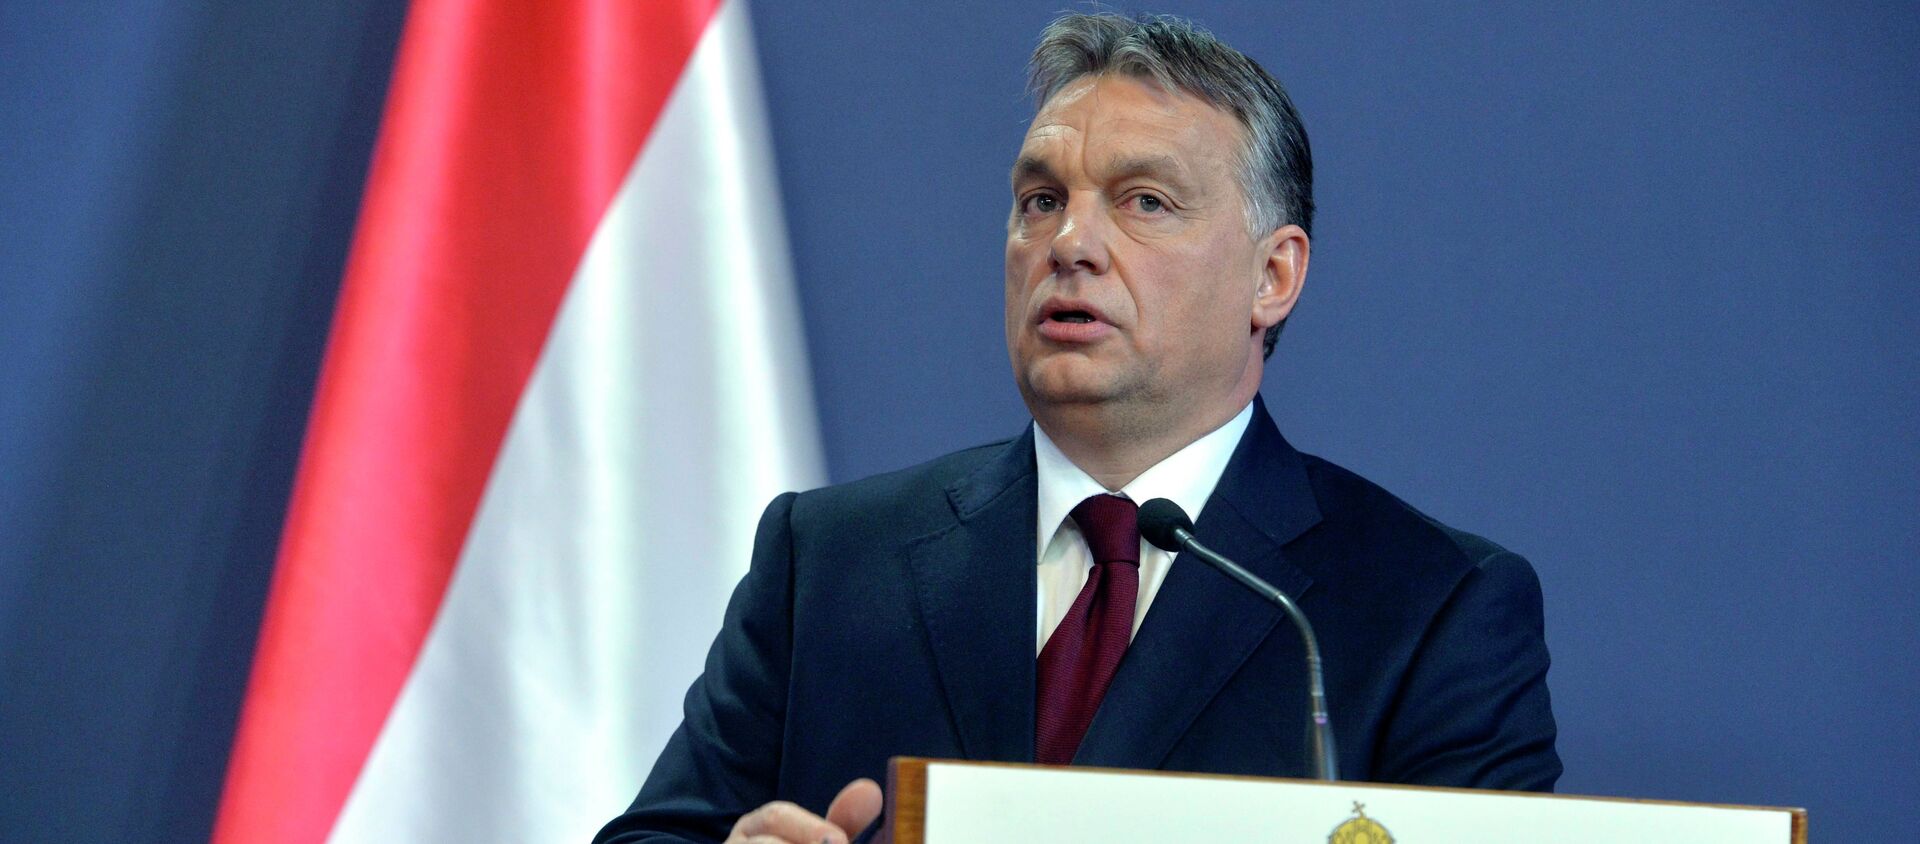 Hungarian Prime Minister Viktor Orban speaks during his joint press conference with Russian President Vladimir Putin in the Parliament building in Budapest, Hungary, Tuesday, Feb. 17, 2015. Putin is staying on a one-day working visit in the Hungarian capital. - Sputnik Moldova-România, 1920, 16.06.2021